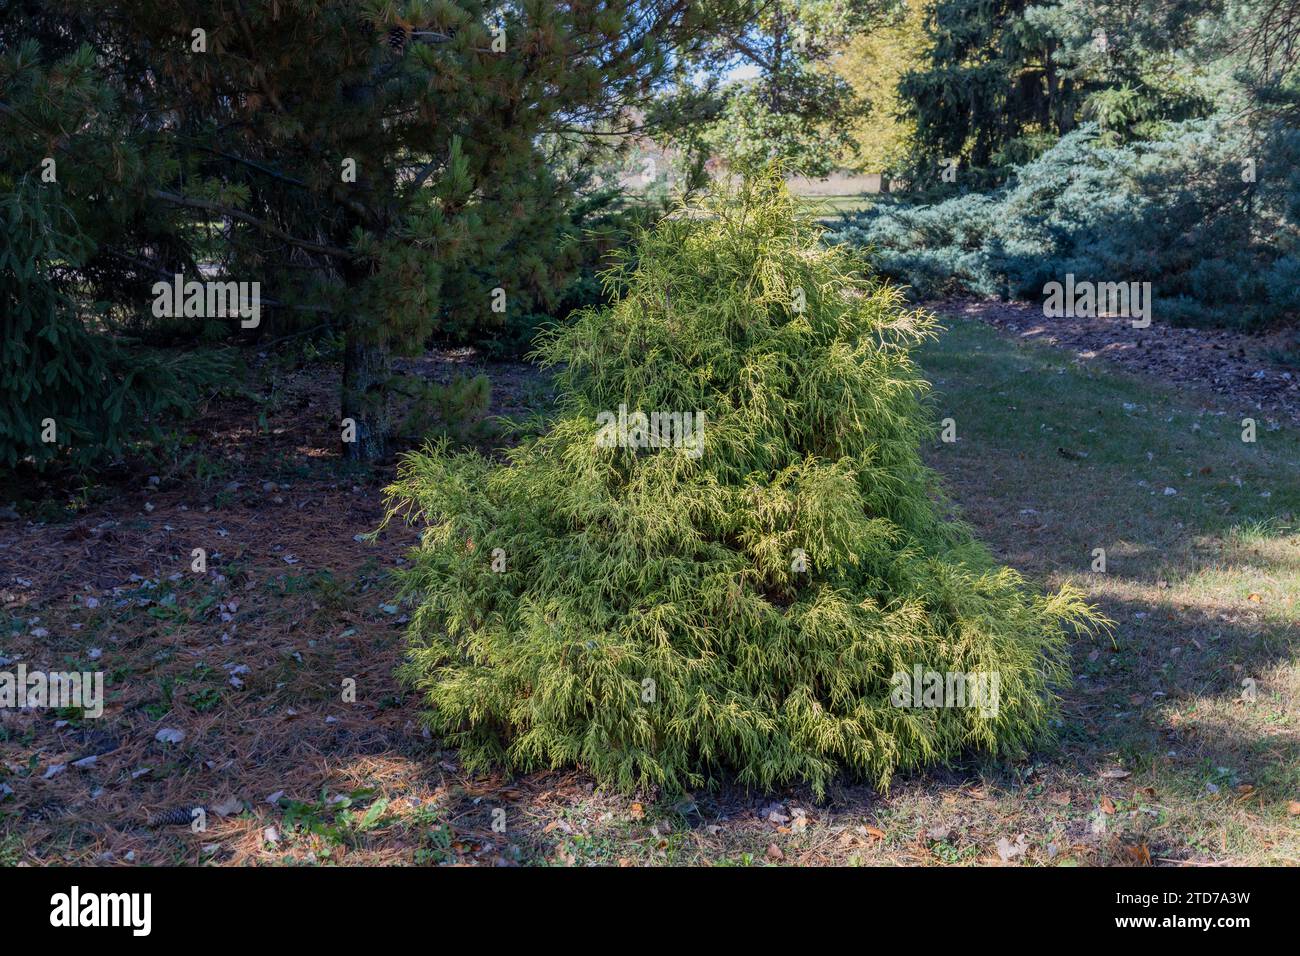 Full frame texture background of a small American arborvitae (thuja) tree on a sunny day Stock Photo